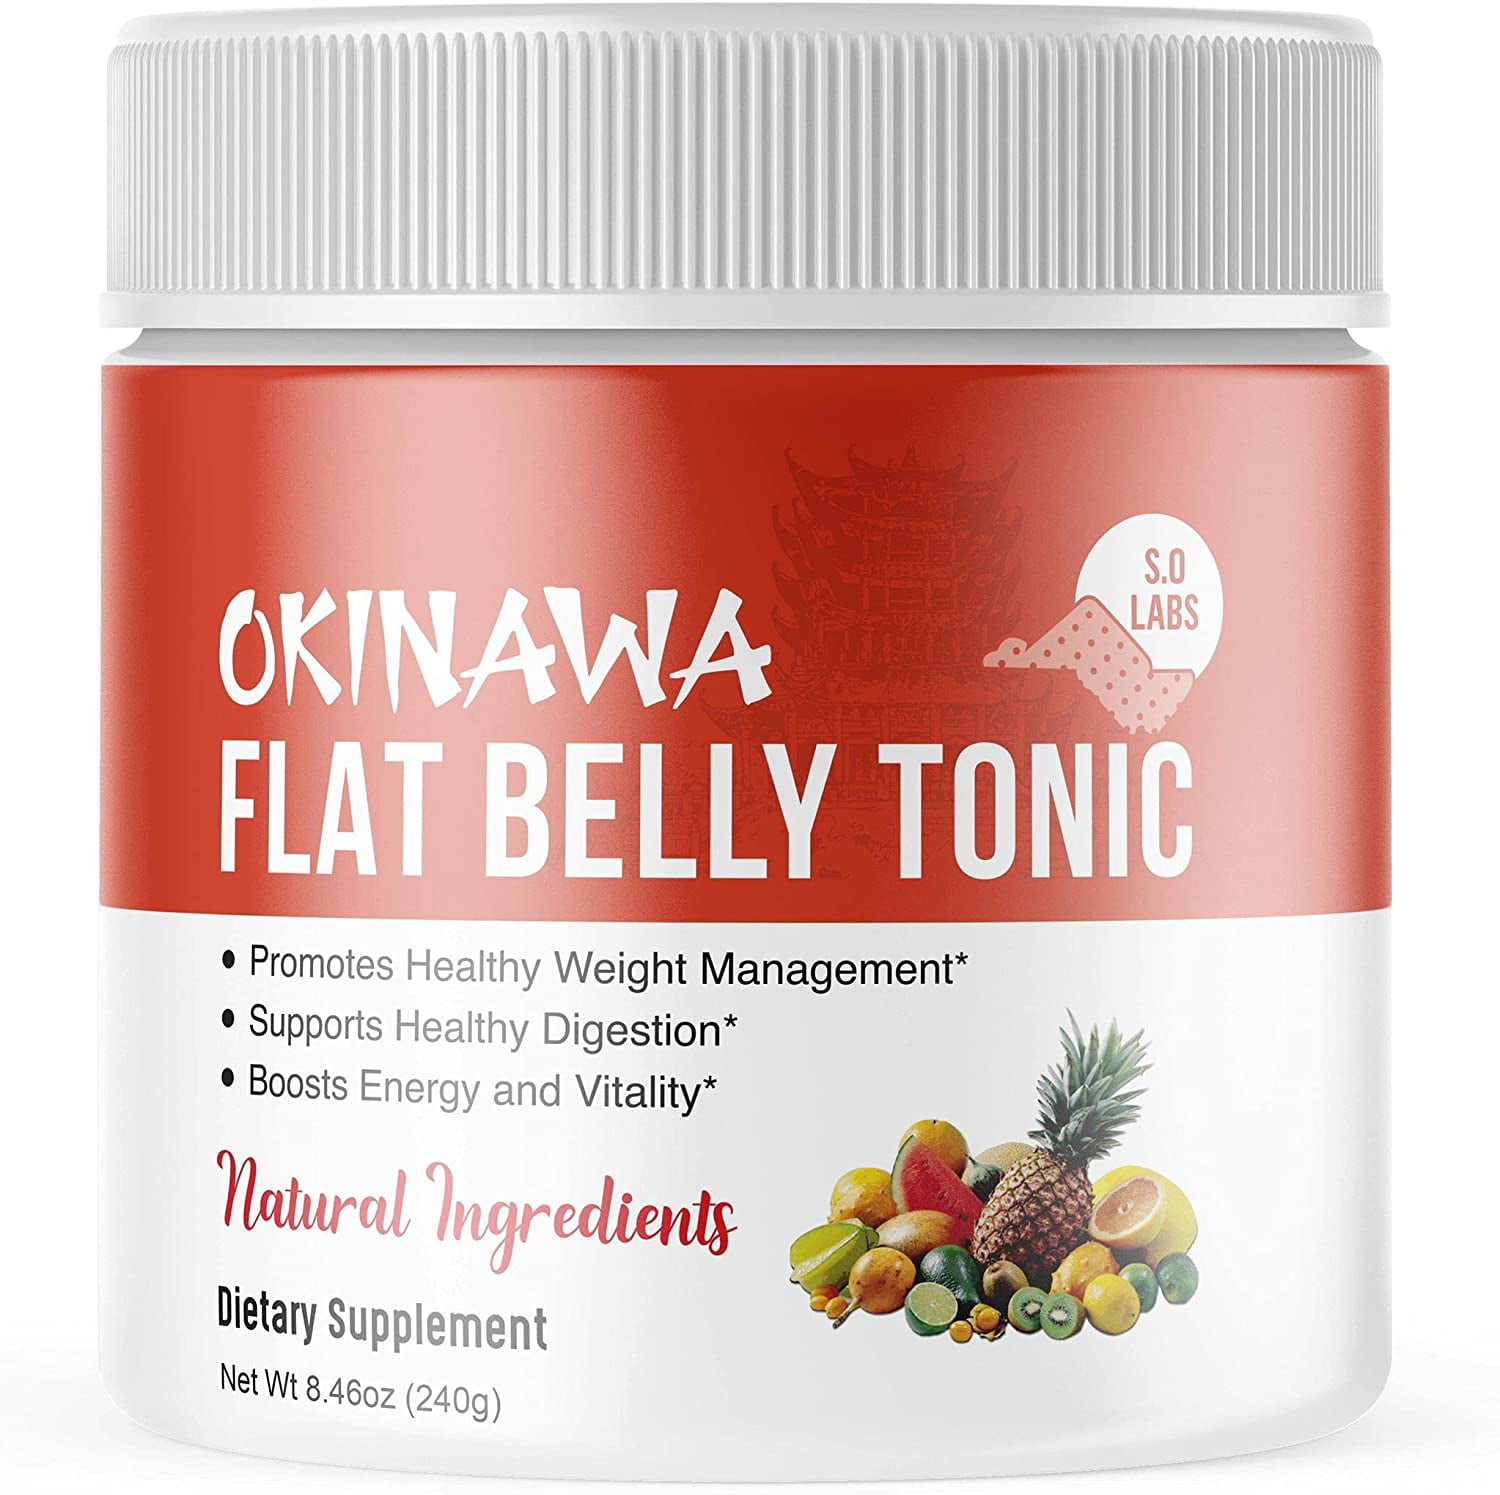 How to use Okinawa Flat Belly Tonic - Quora